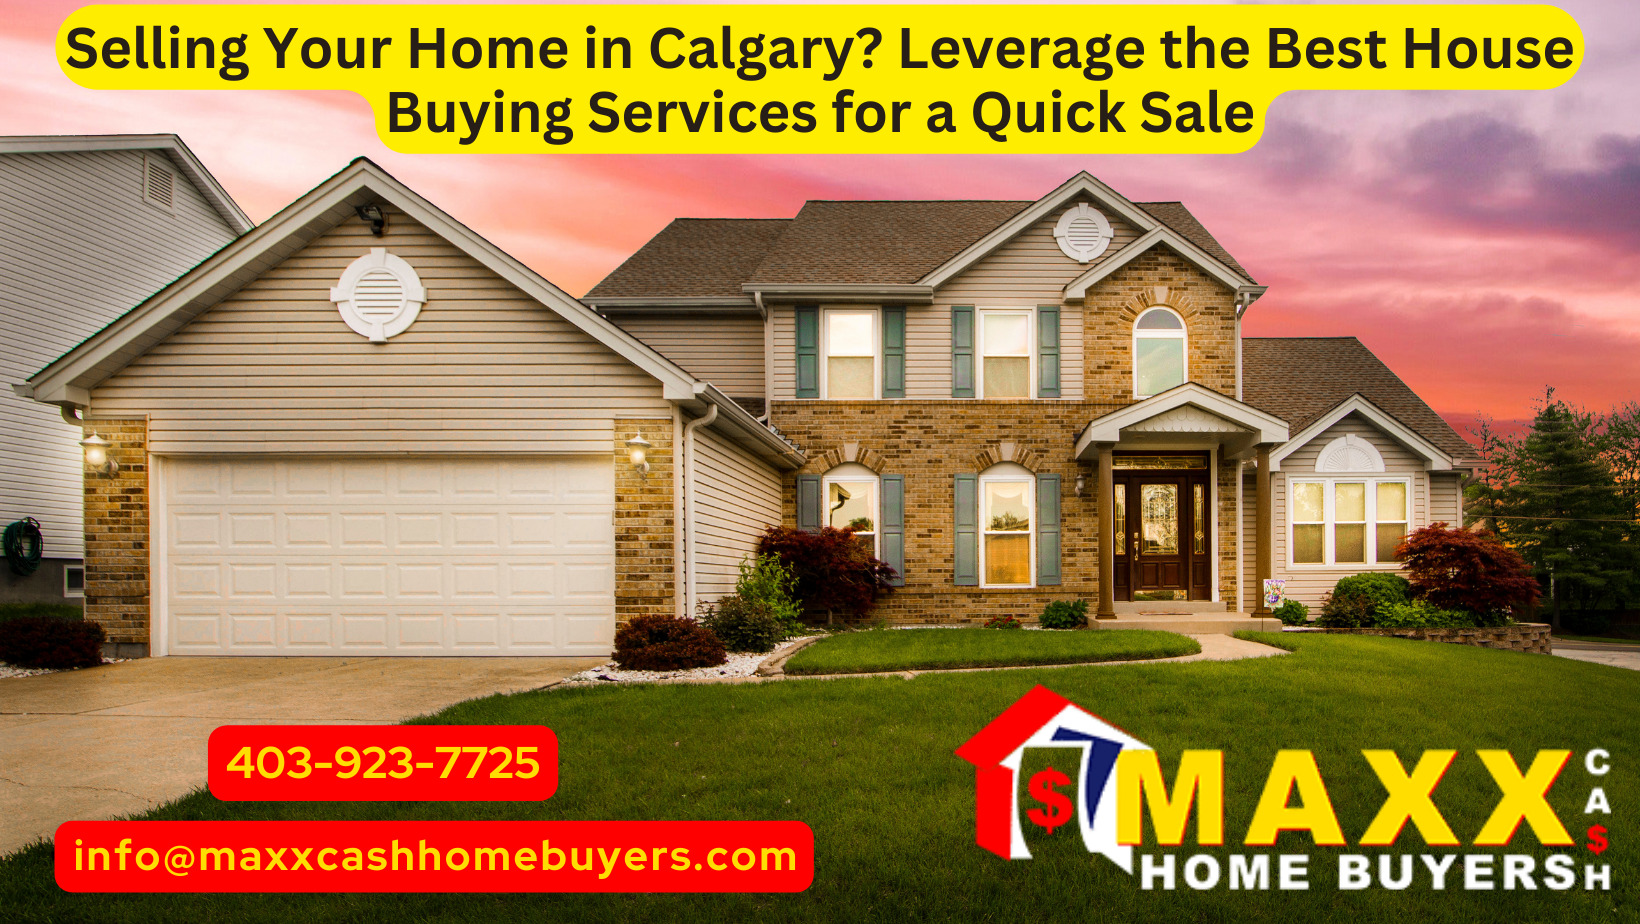 Selling Your Home in Calgary - Leverage the Best House Buying Services for a Quick Sale